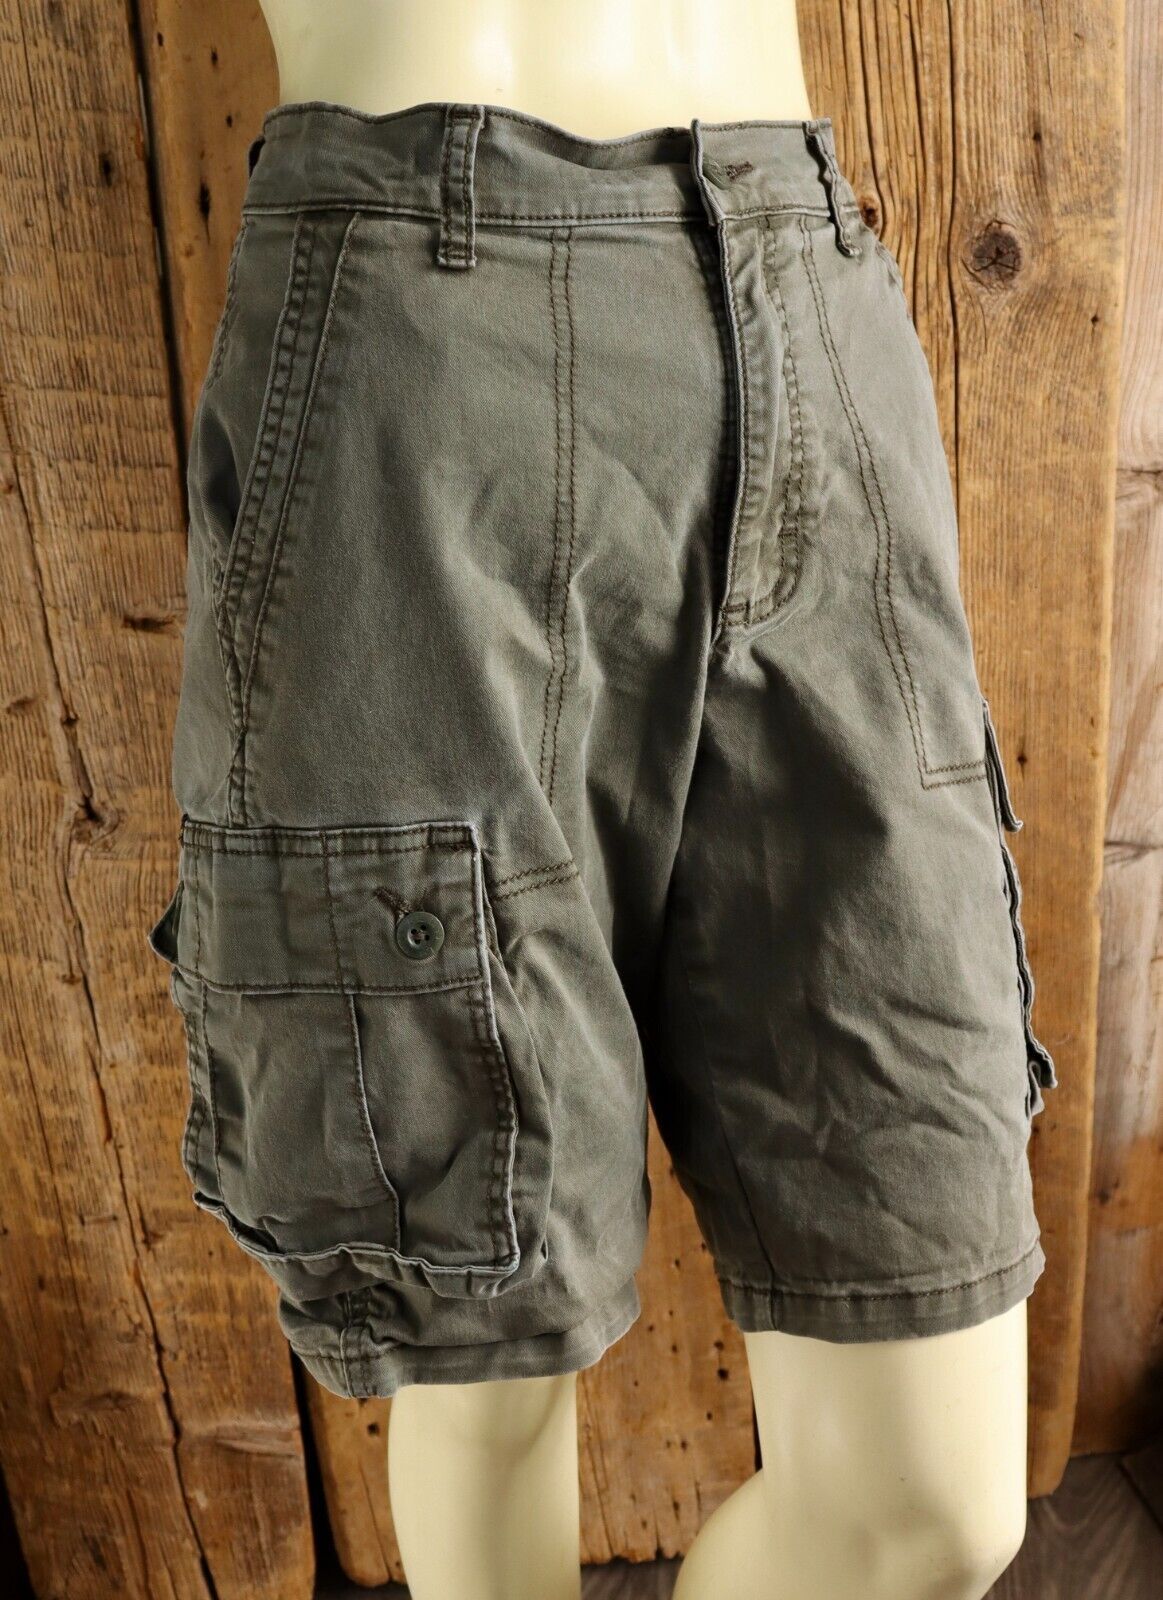 How
Cargo Shorts Can Create For You The Right Rugged Aura